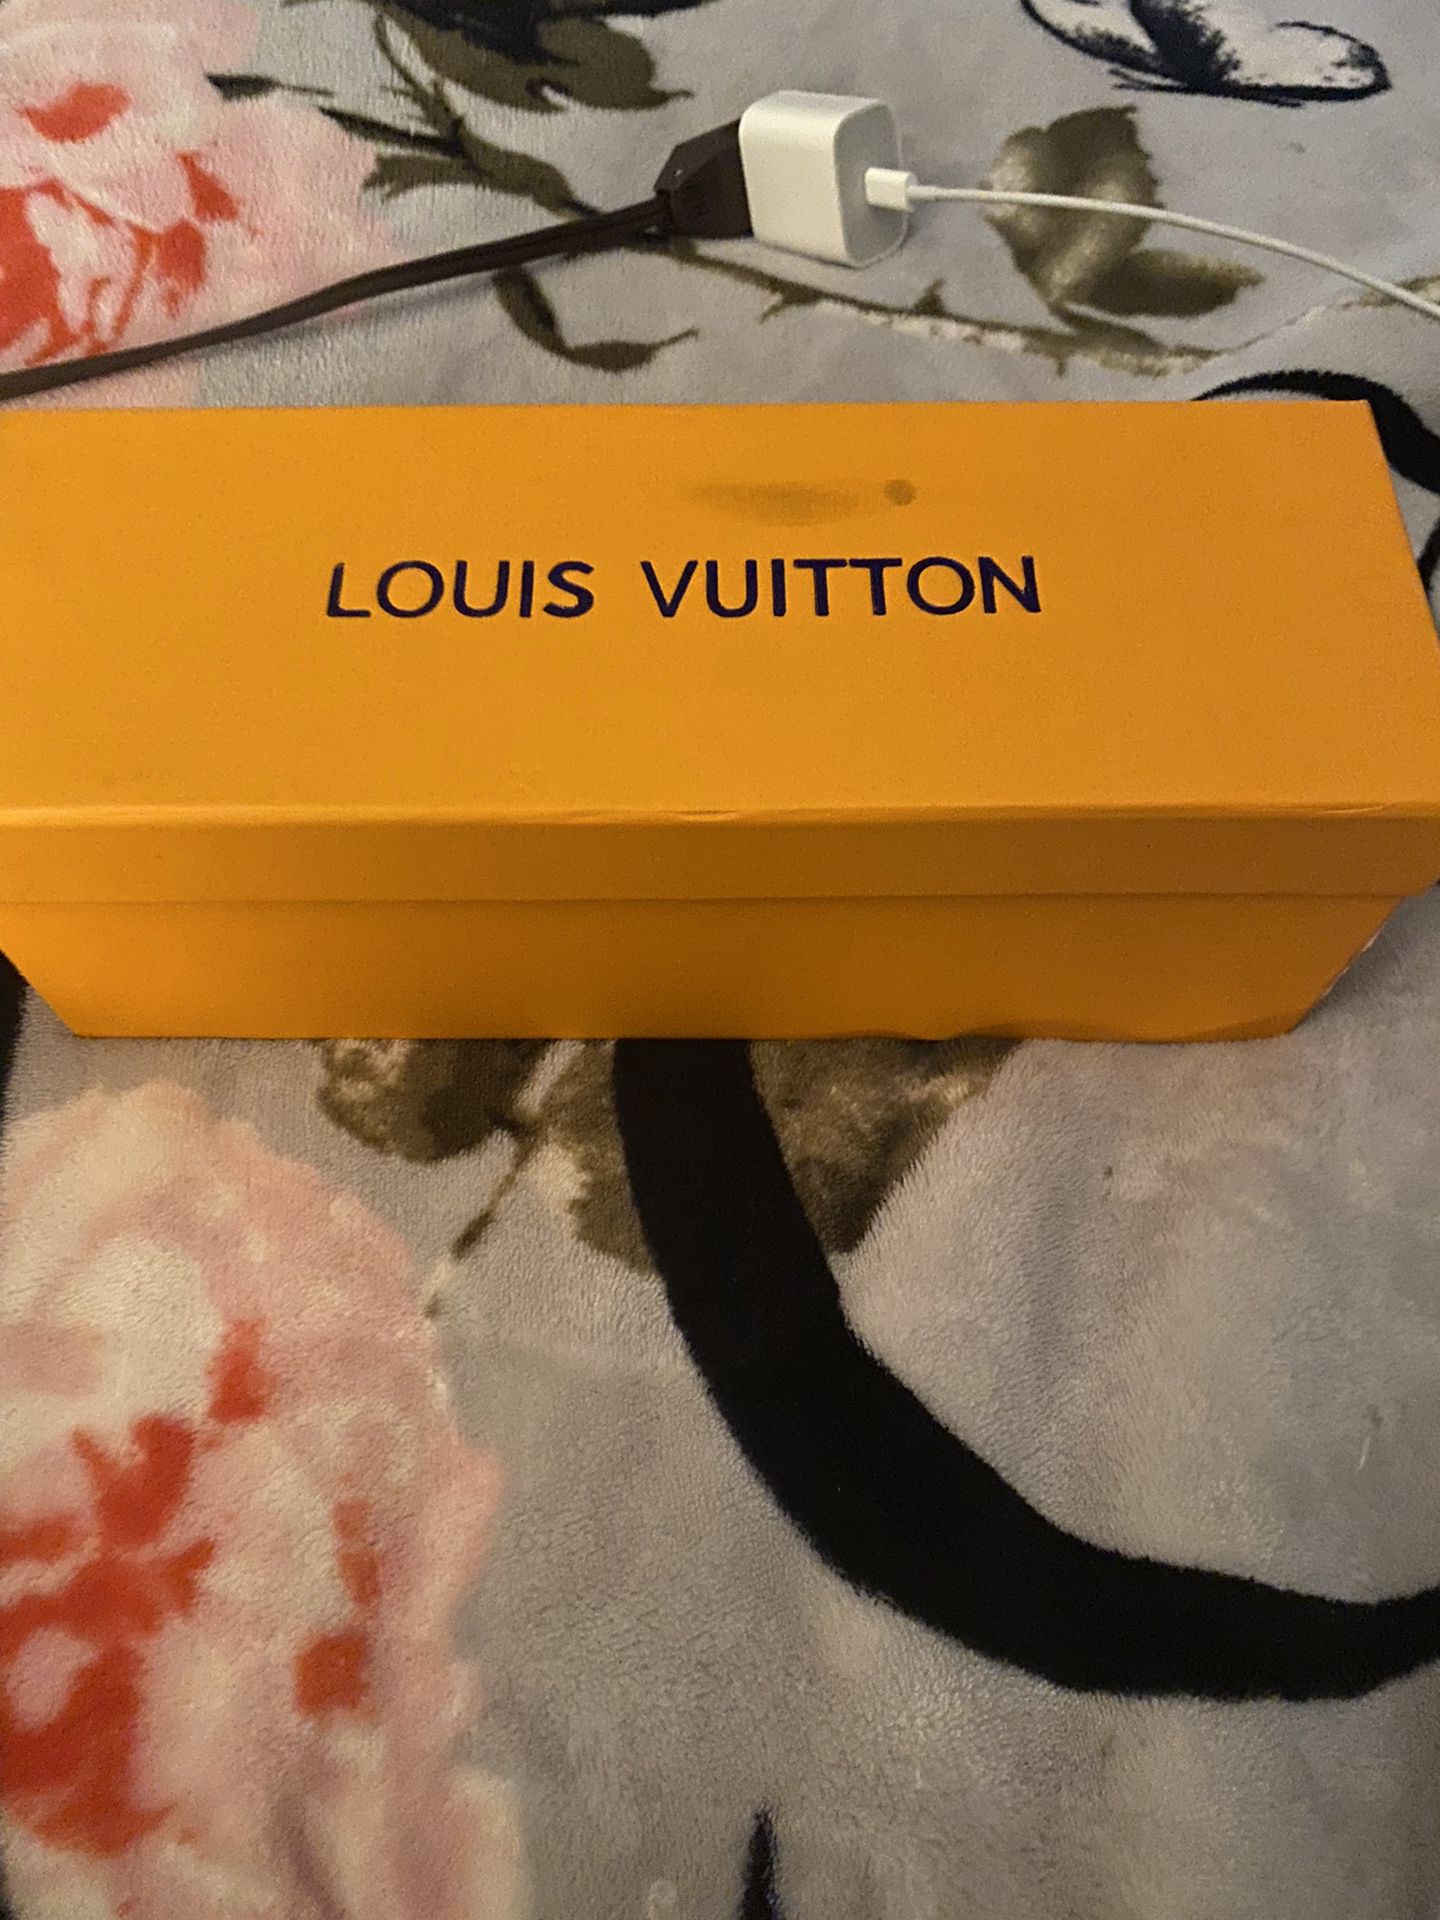 Other, Digital Genuine Louisvuitton Thermos Cold Hot